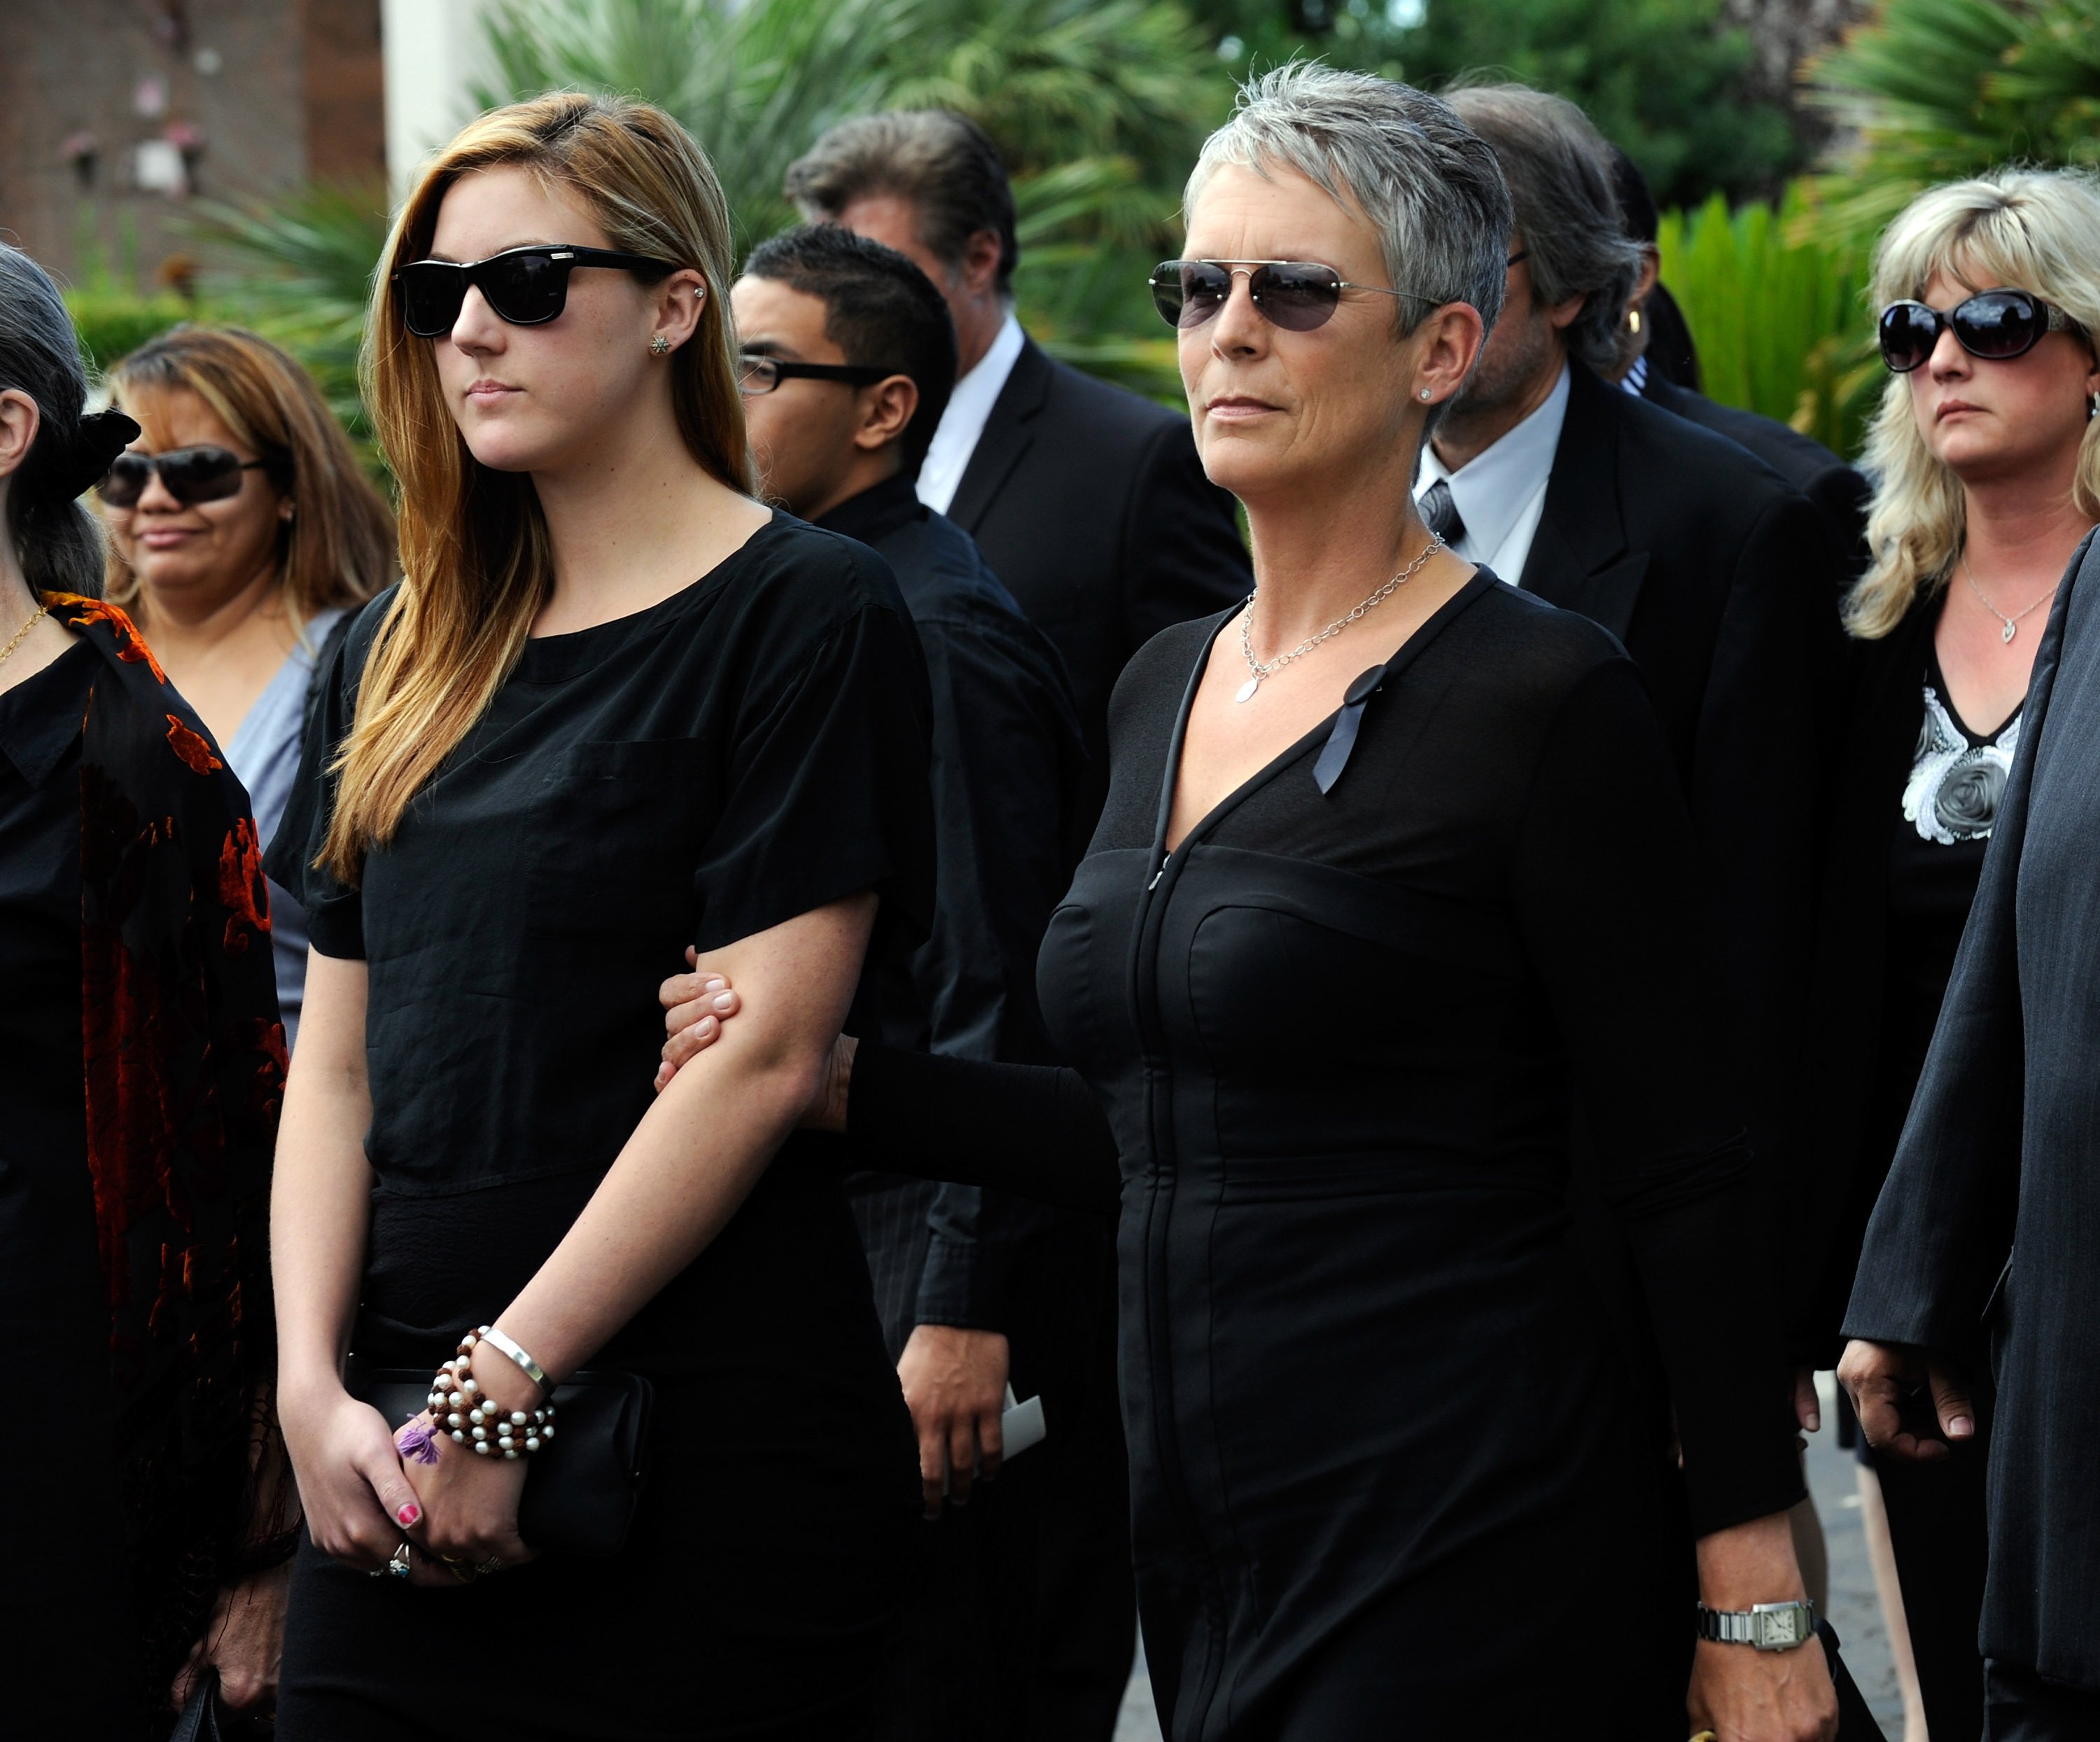 Jamie Lee Curtis and her daughter Annie Guest attend the funeral for Curtis' father, Tony Curtis, at Palm Mortuary & Cemetary October 4, 2010 in Henderson, Nevada ┃Source: Getty Images